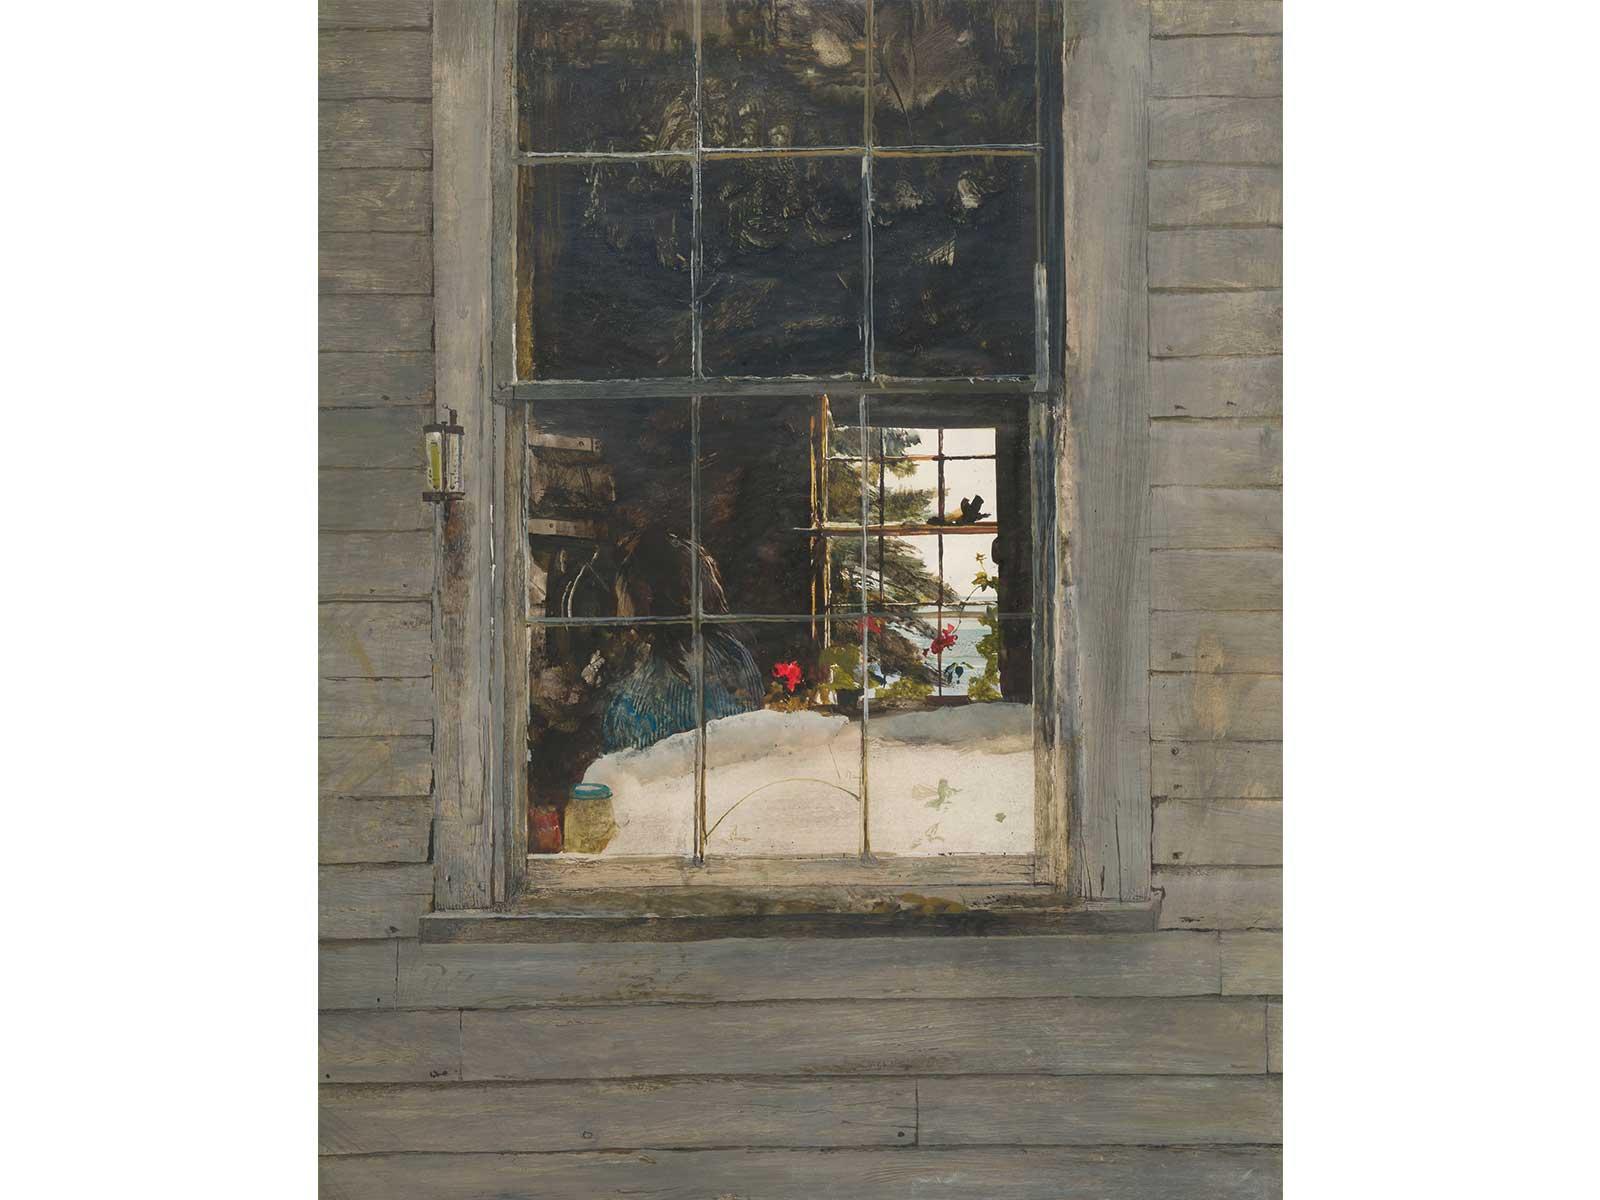 Geraniums, 1960 is a painting of a bedroom as seen through an exterior window. Geraniums appear in the background, seemingly on a bedside table. 